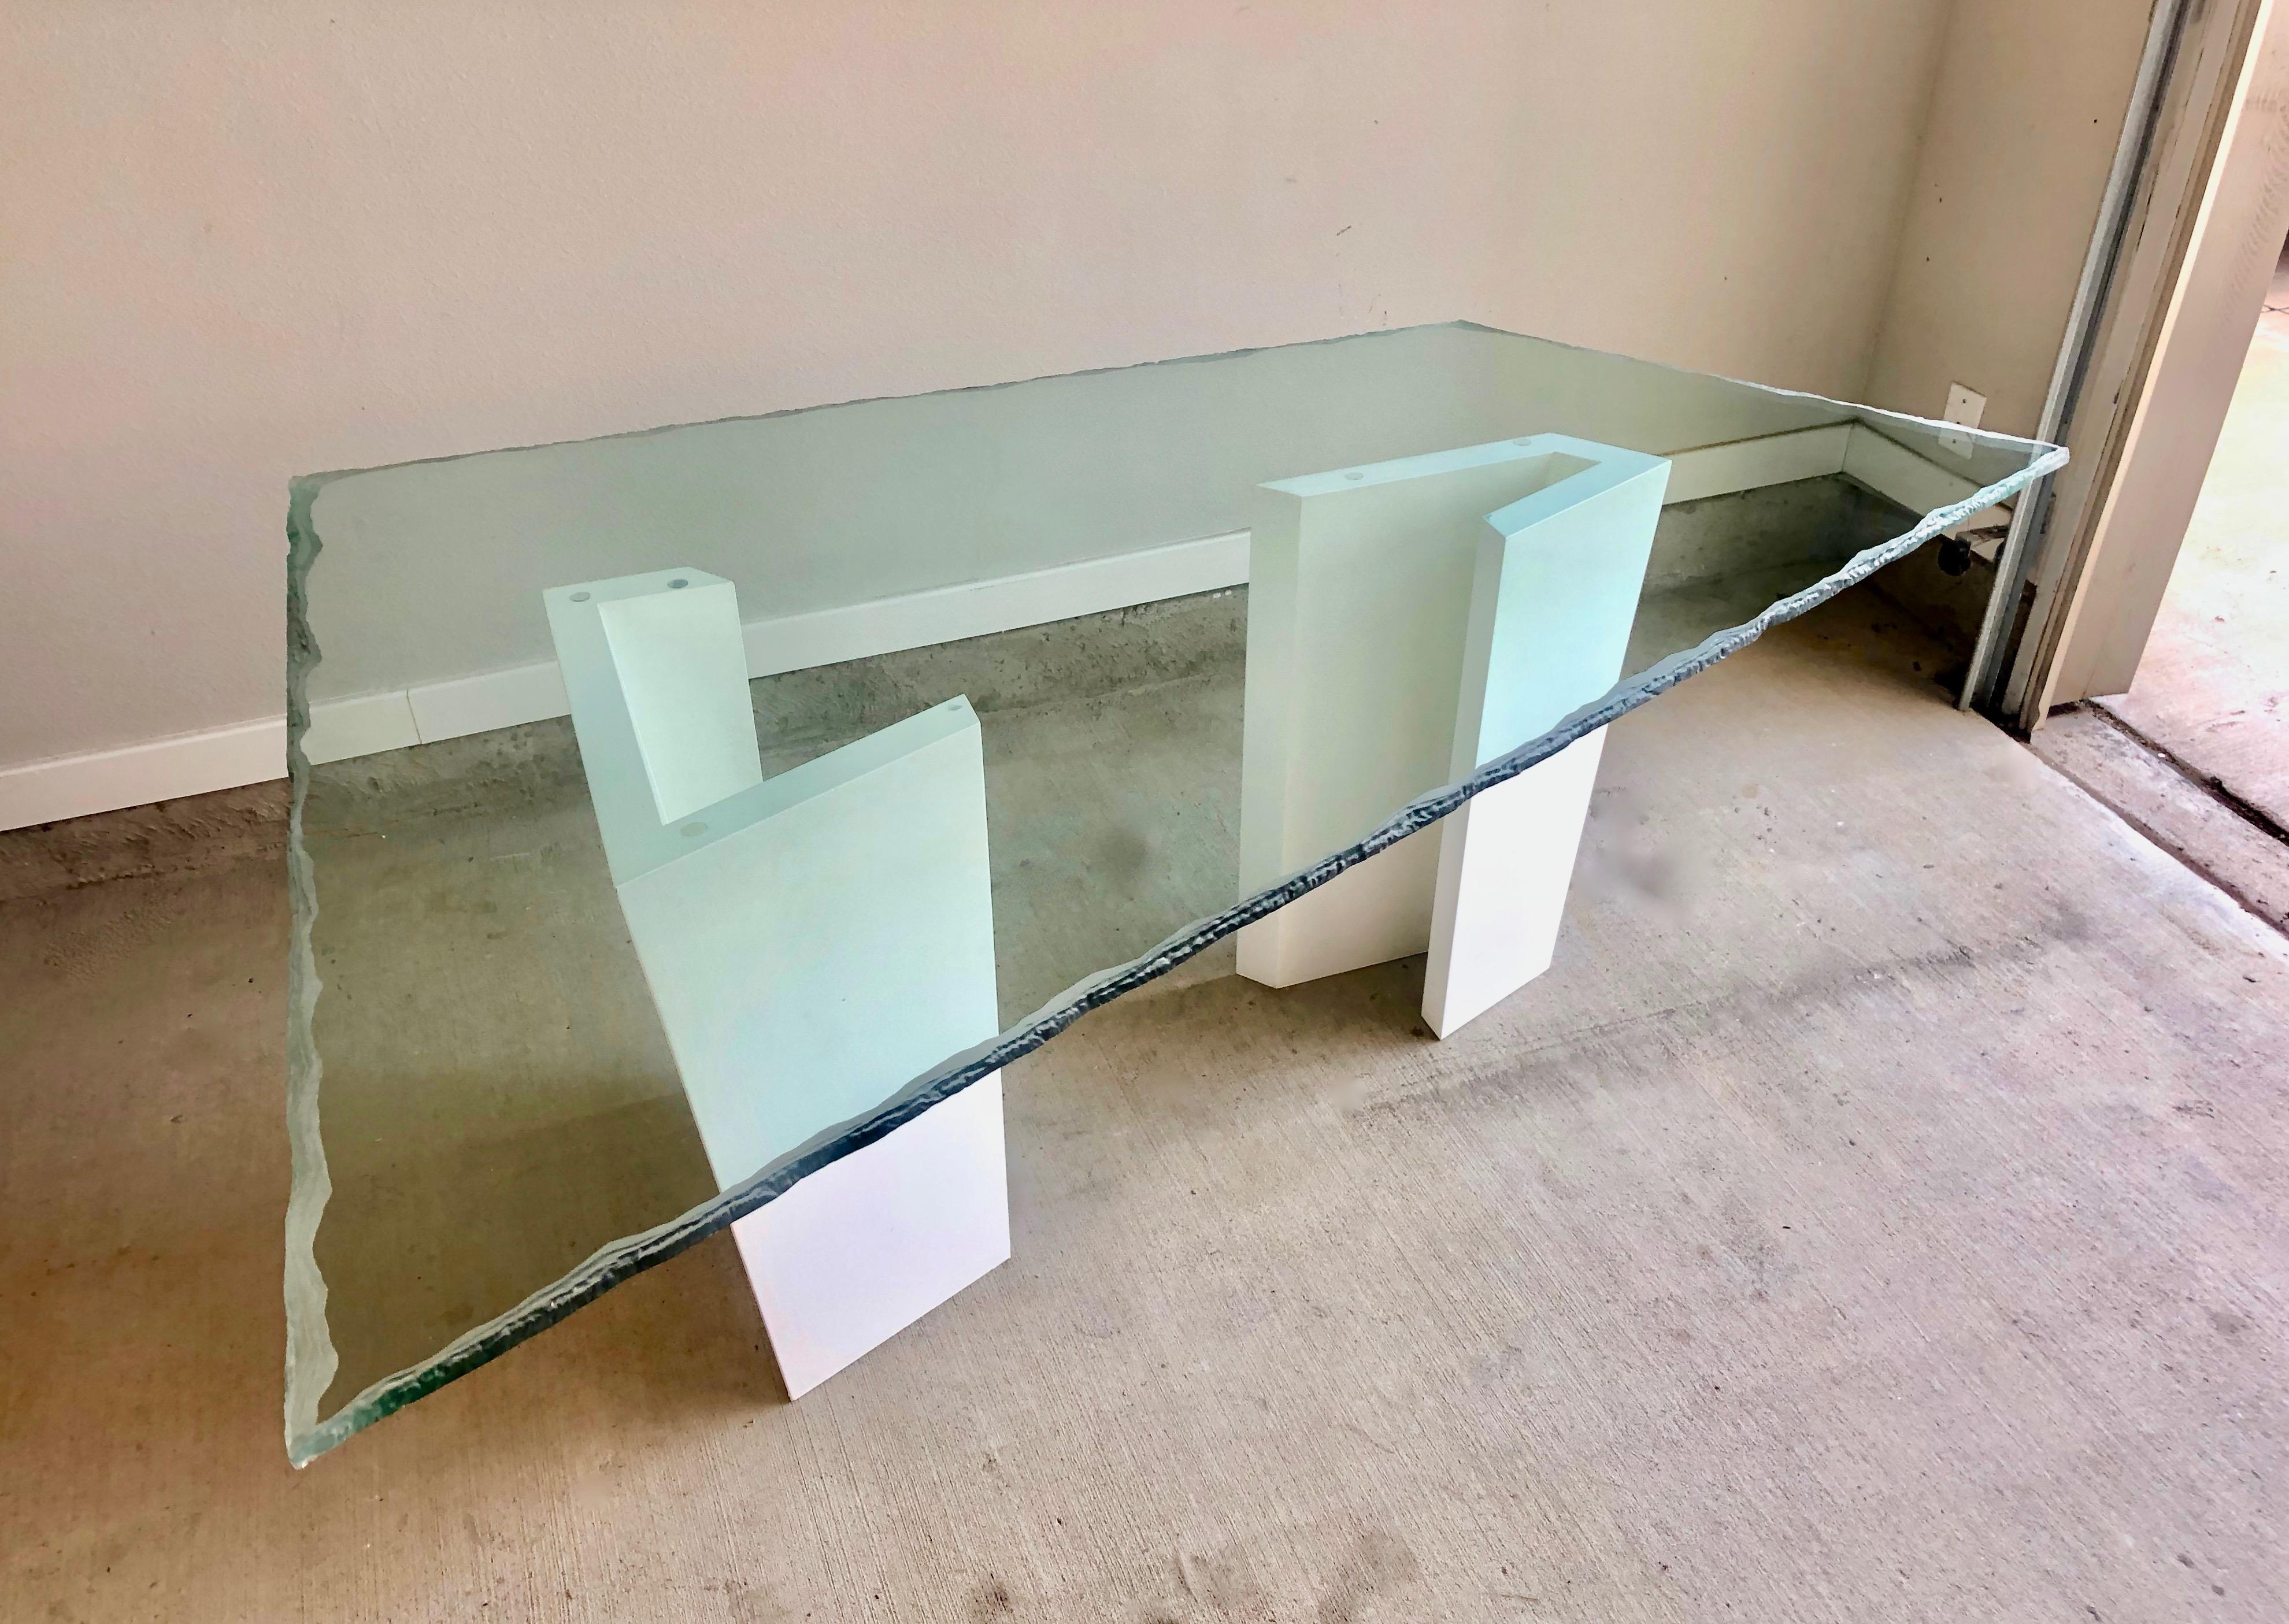 Post Modern Trapezium Sculpted Glass Top Dining Table On an abstract lacquered white wood base. This table can also be used as an executive desk.